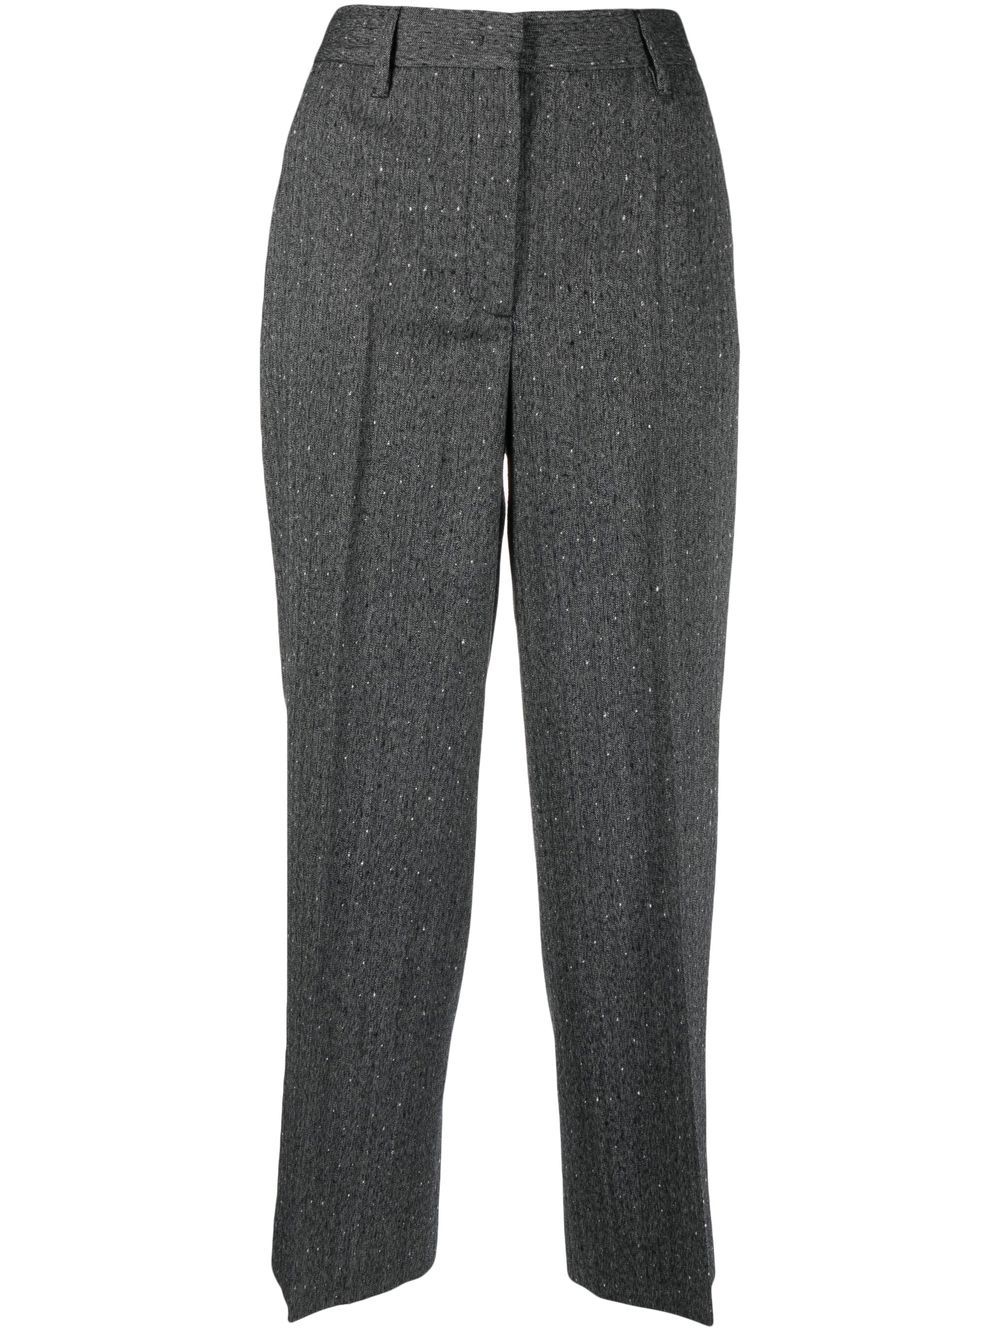 Prada Pre-Owned 2010s cropped tailored trousers - Grey von Prada Pre-Owned